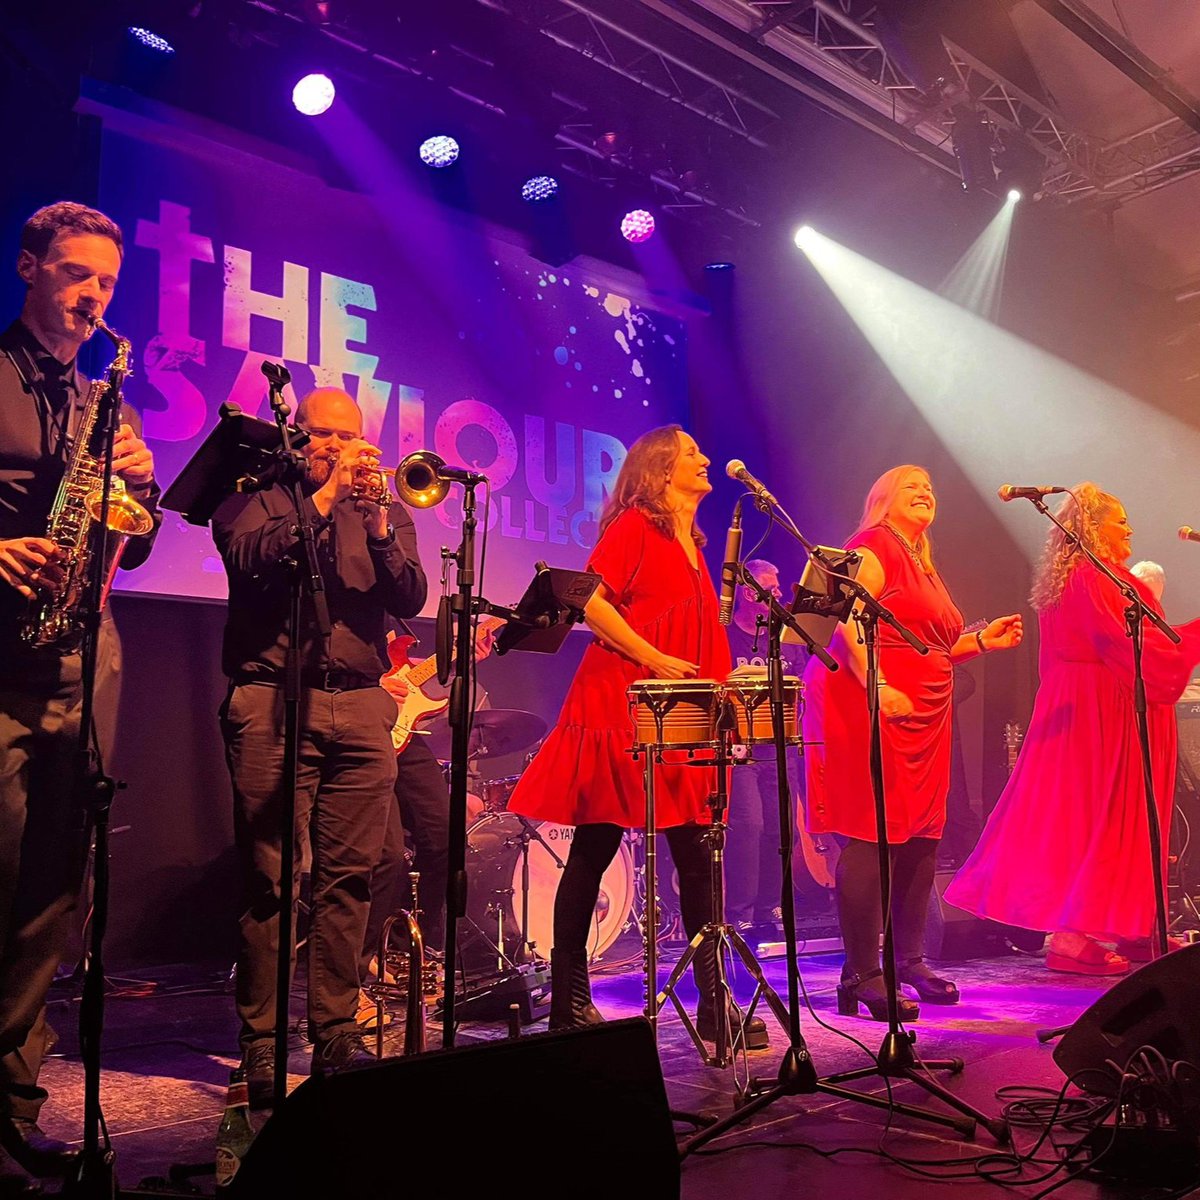 The Saviours Collective return to Komedia, bringing another evening of classic R&B/soul/funk hits for dancing the night away! 📆 - Friday 12 July 🎟 - komediabath.co.uk/events/1285320…